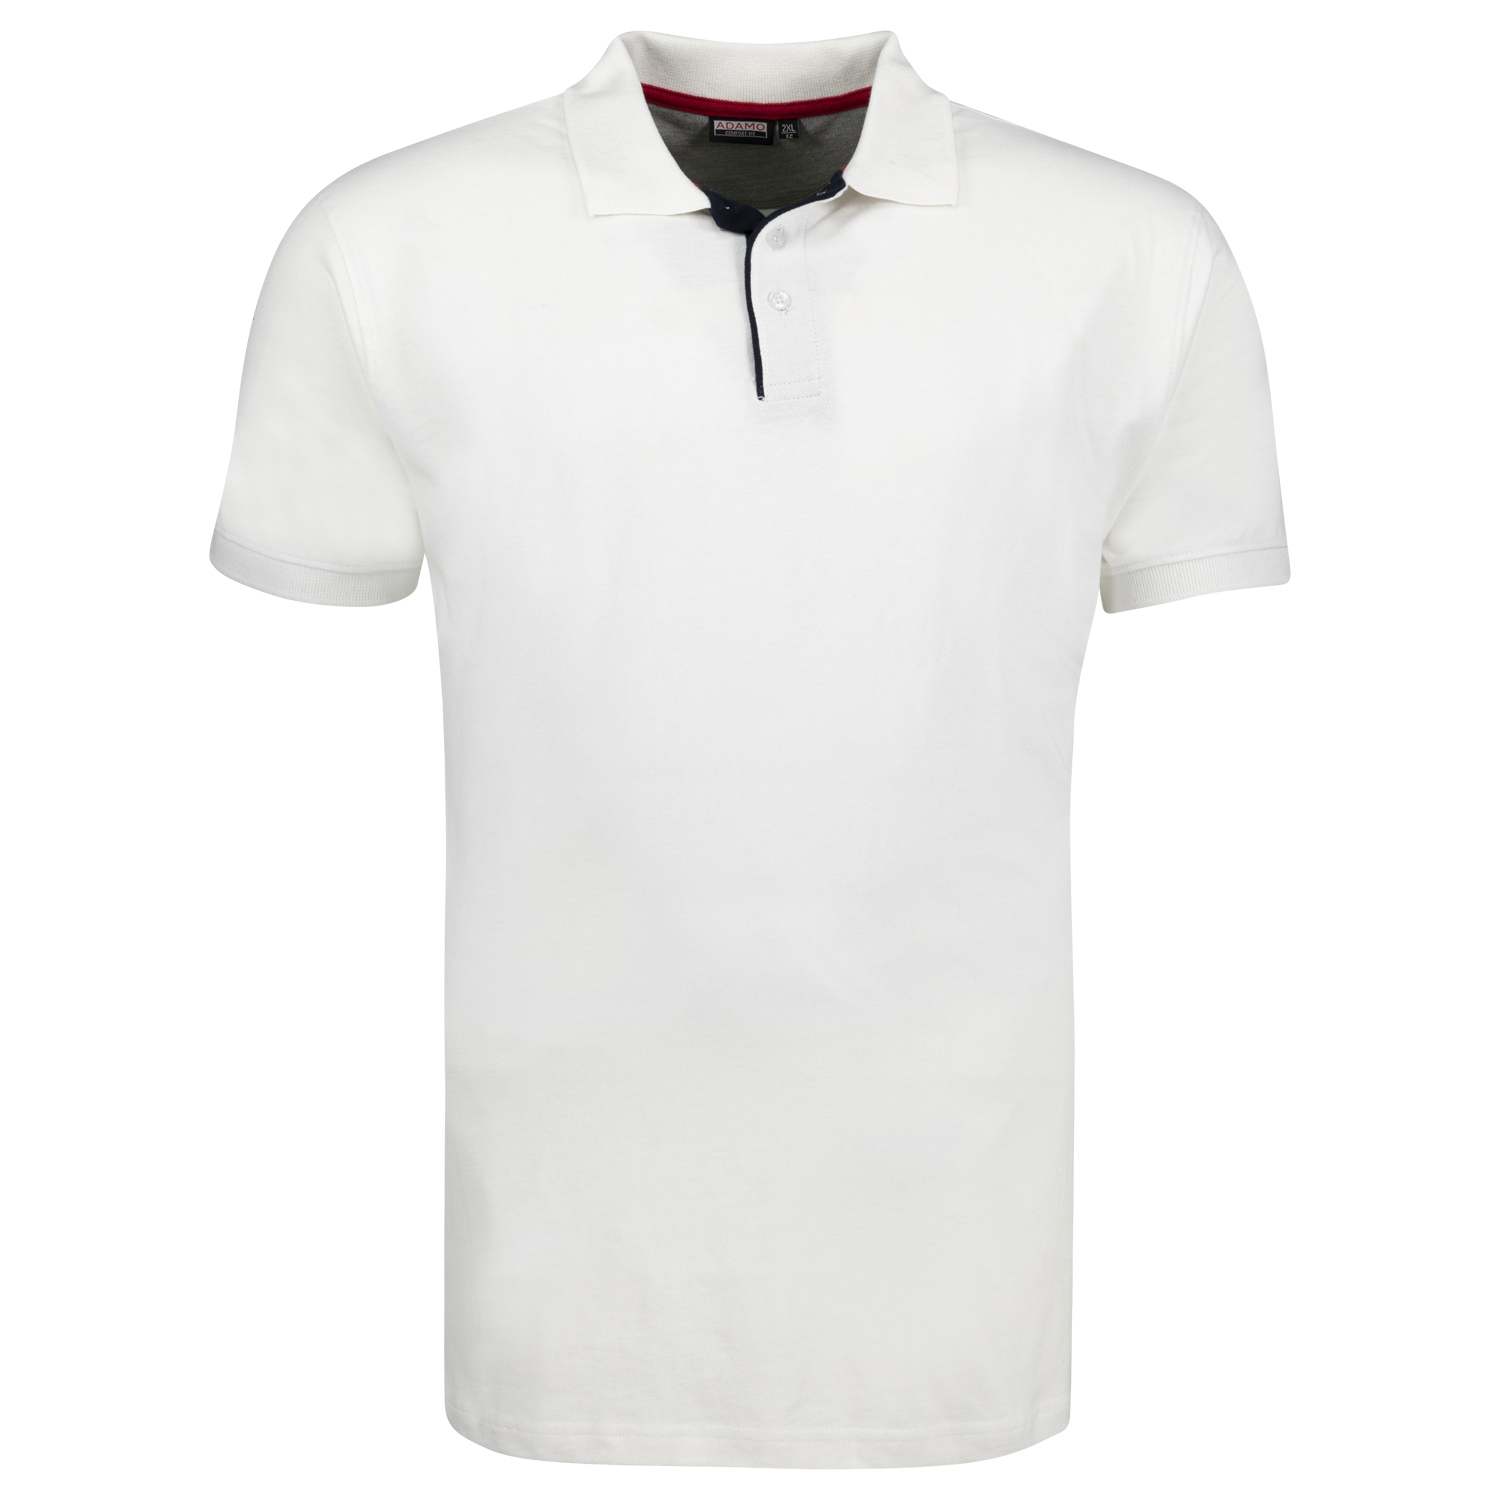 Short sleeve polo shirt COMFORT FIT series Pablo by Adamo in white up to oversize 12XL